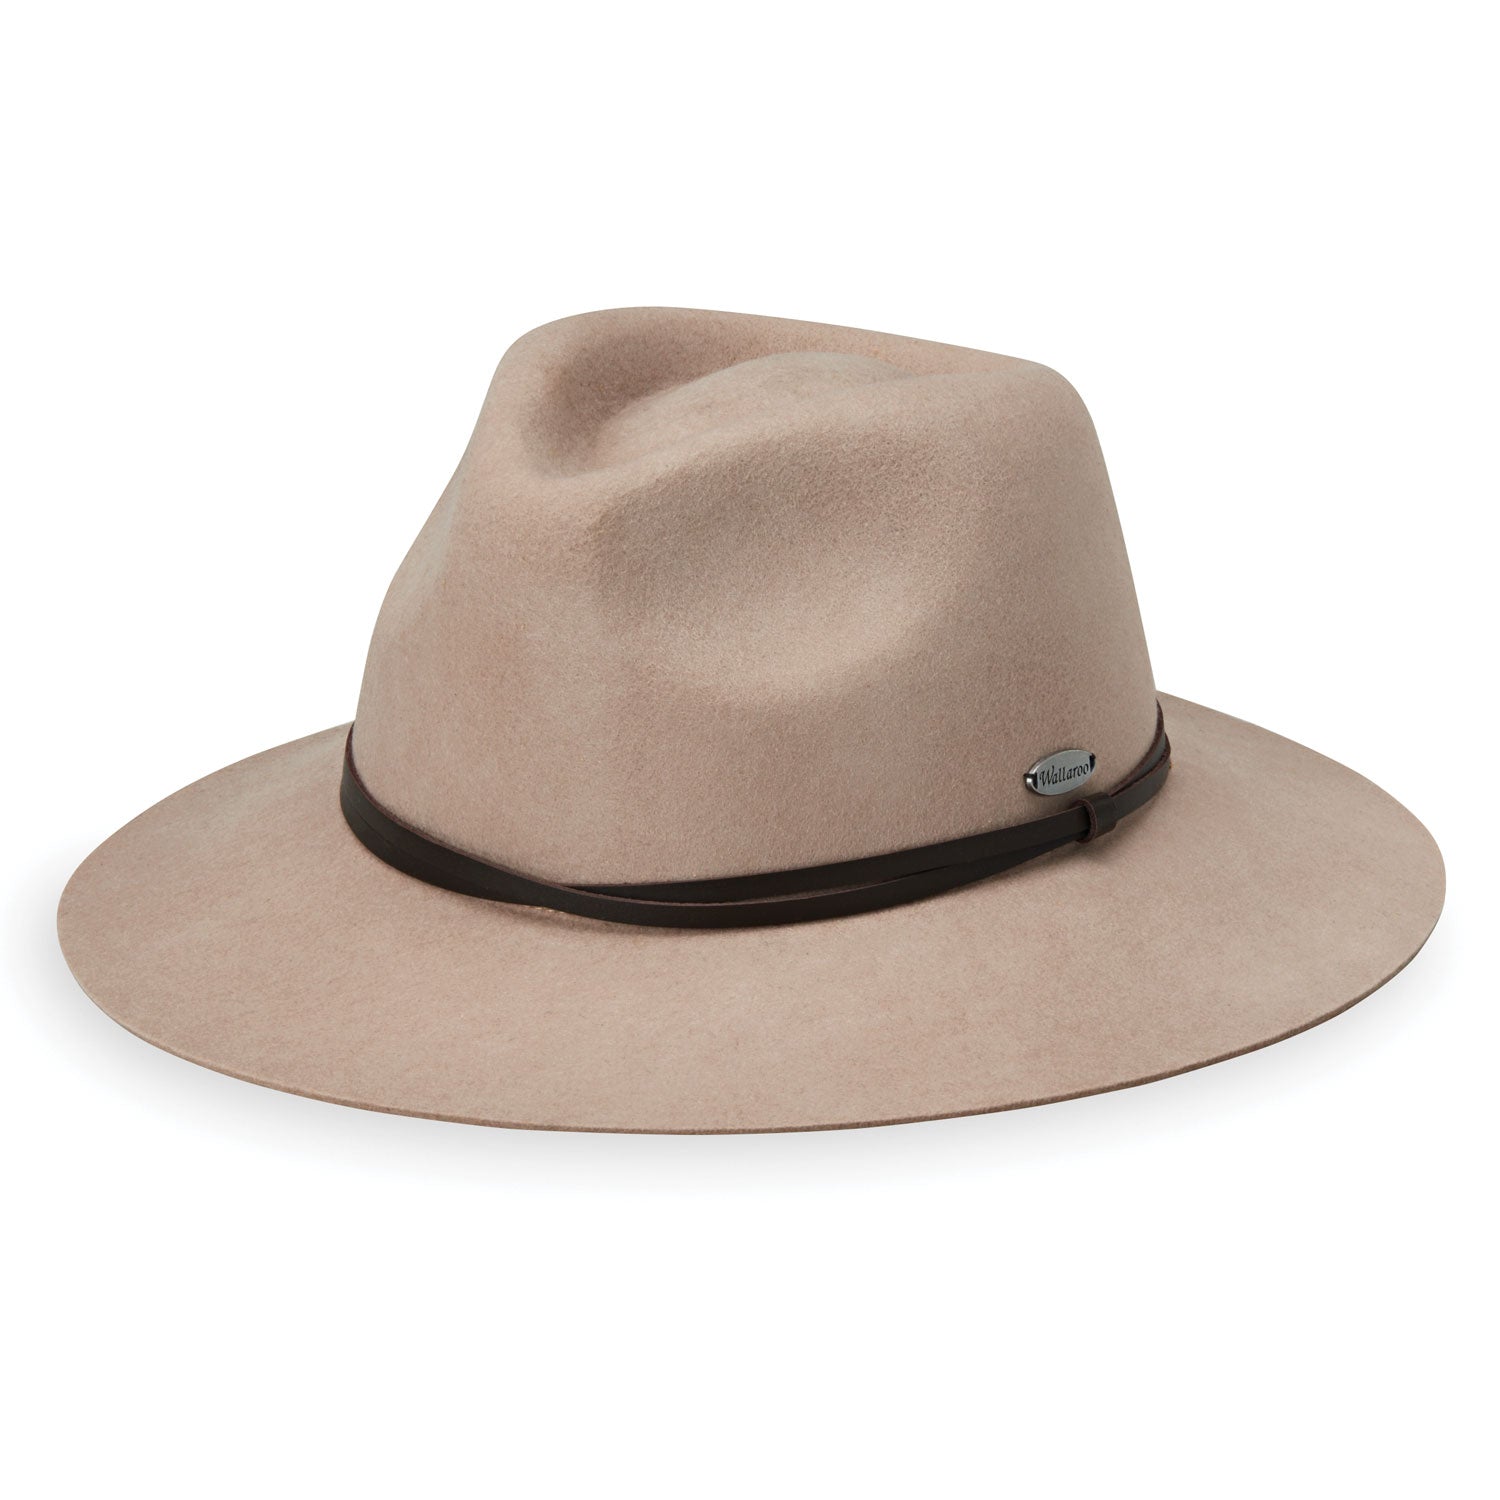 Featuring Front of Women's Packable UPF Fedora Style Petite Aspen Wool Felt Sun Hat in Taupe from Wallaroo